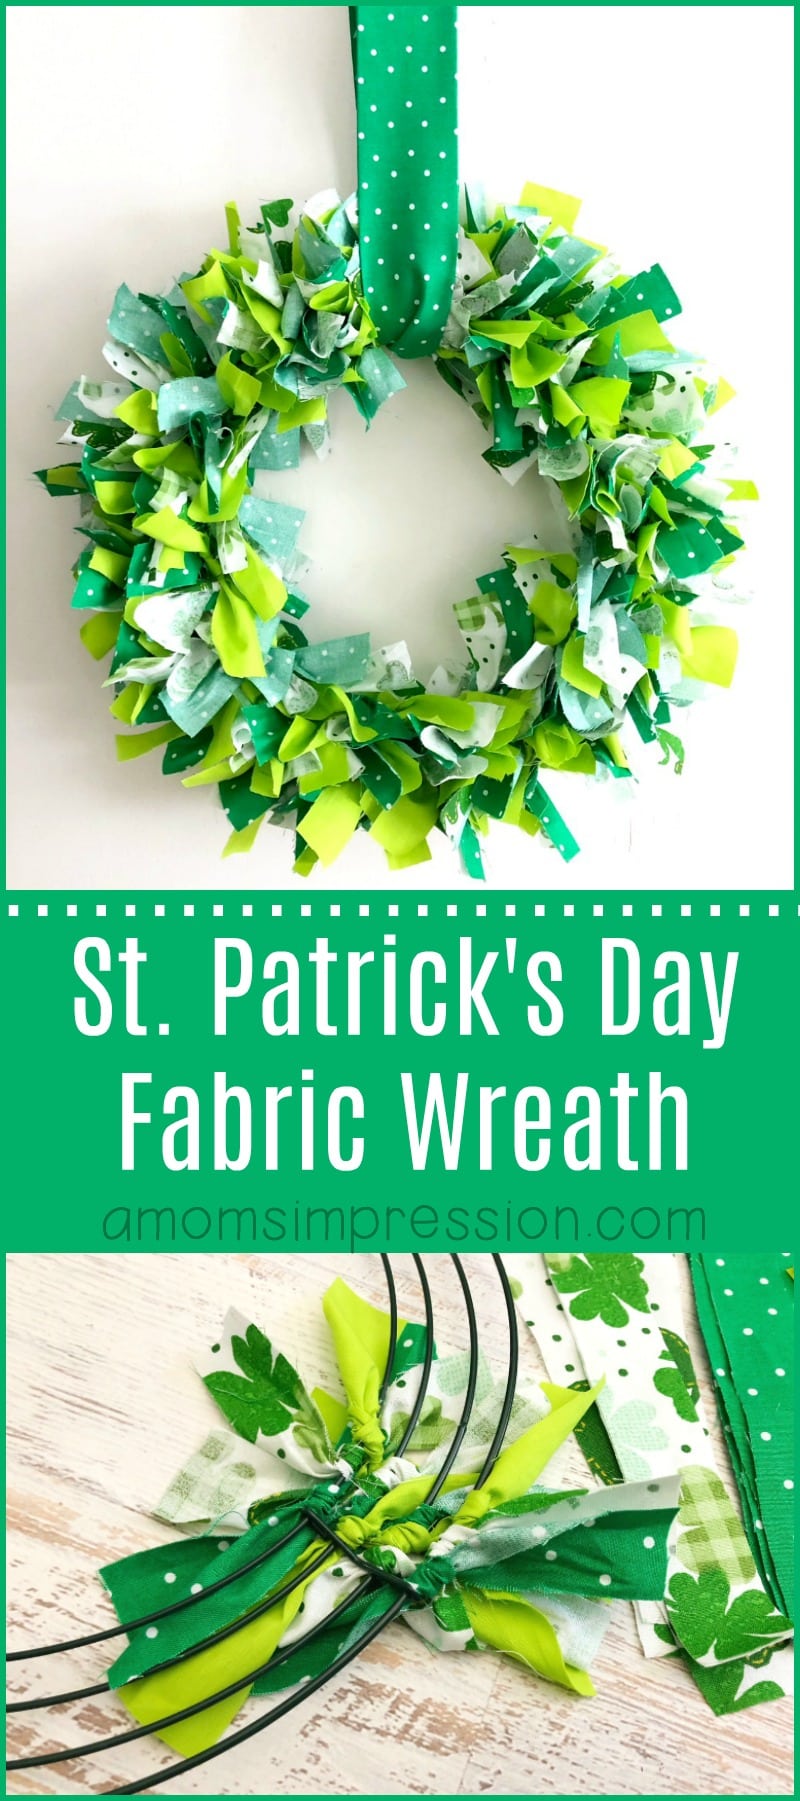 This fabric shamrock wreath is easy to put together and is the perfect addition to your St. Patty's decor!